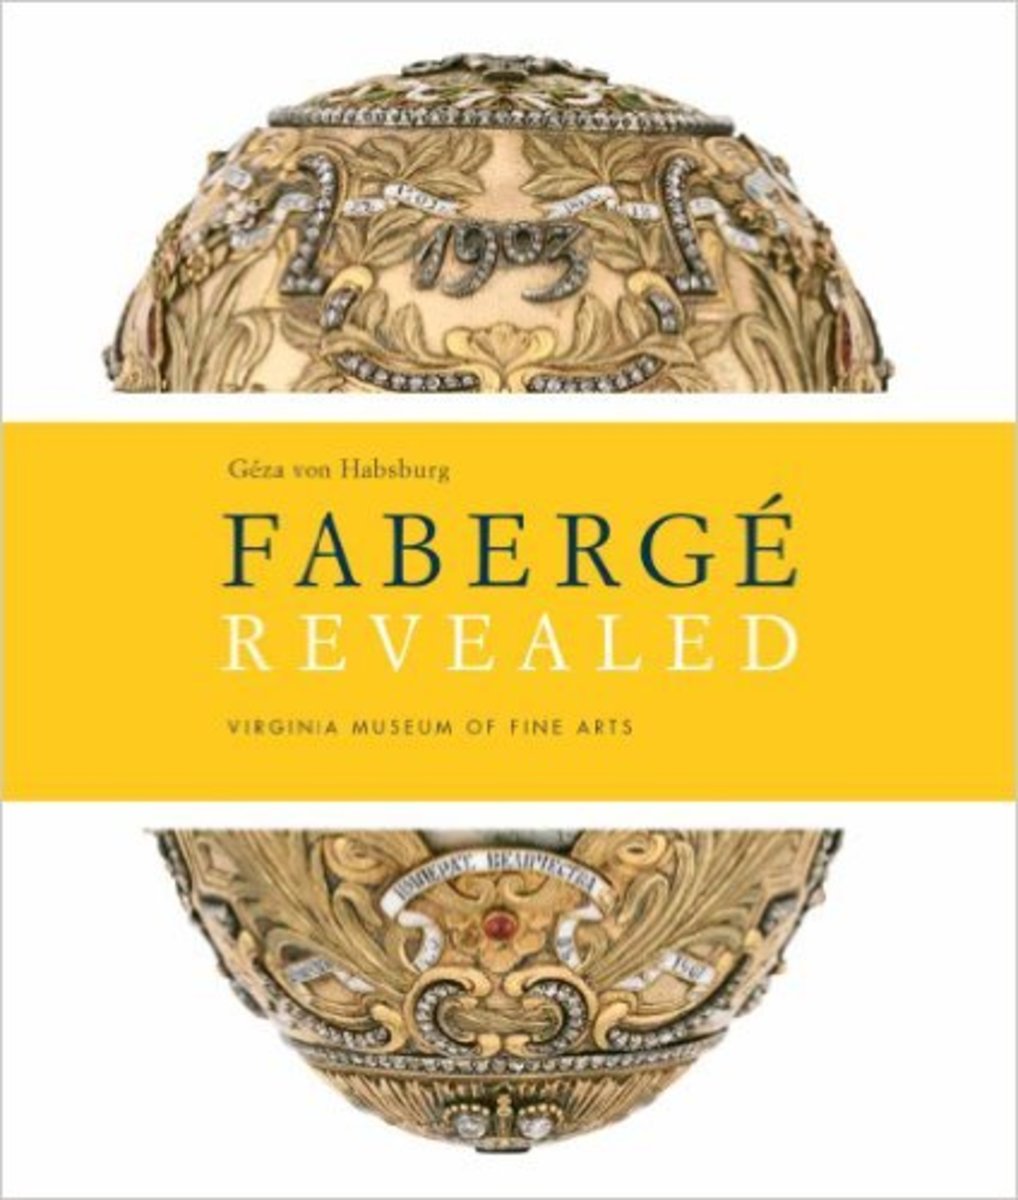 Faberge Revealed: At the Virginia Museum of Fine Arts by Geza Von Habsburg - Image from amazon.com